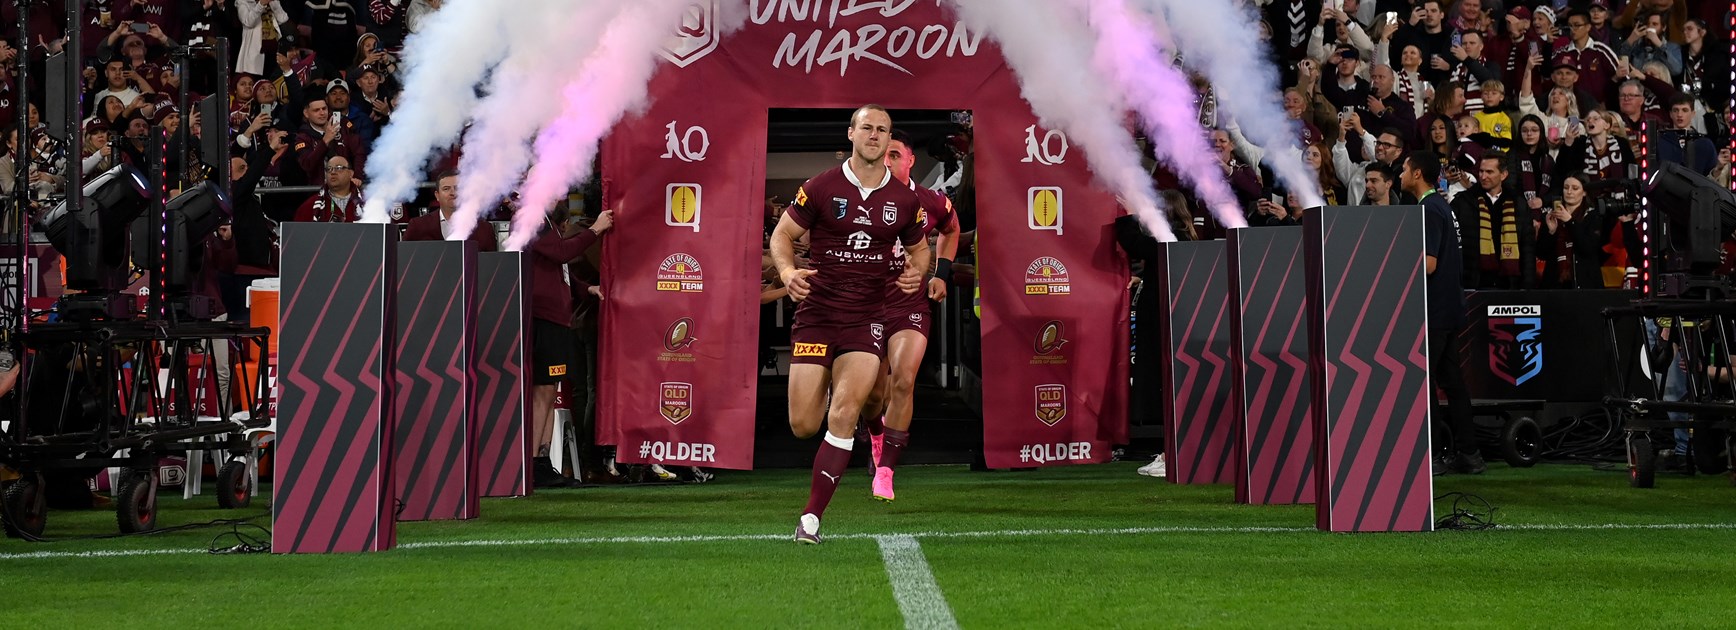 DCE: ‘That energy that hits you from this Queensland crowd, there’s nothing like it’